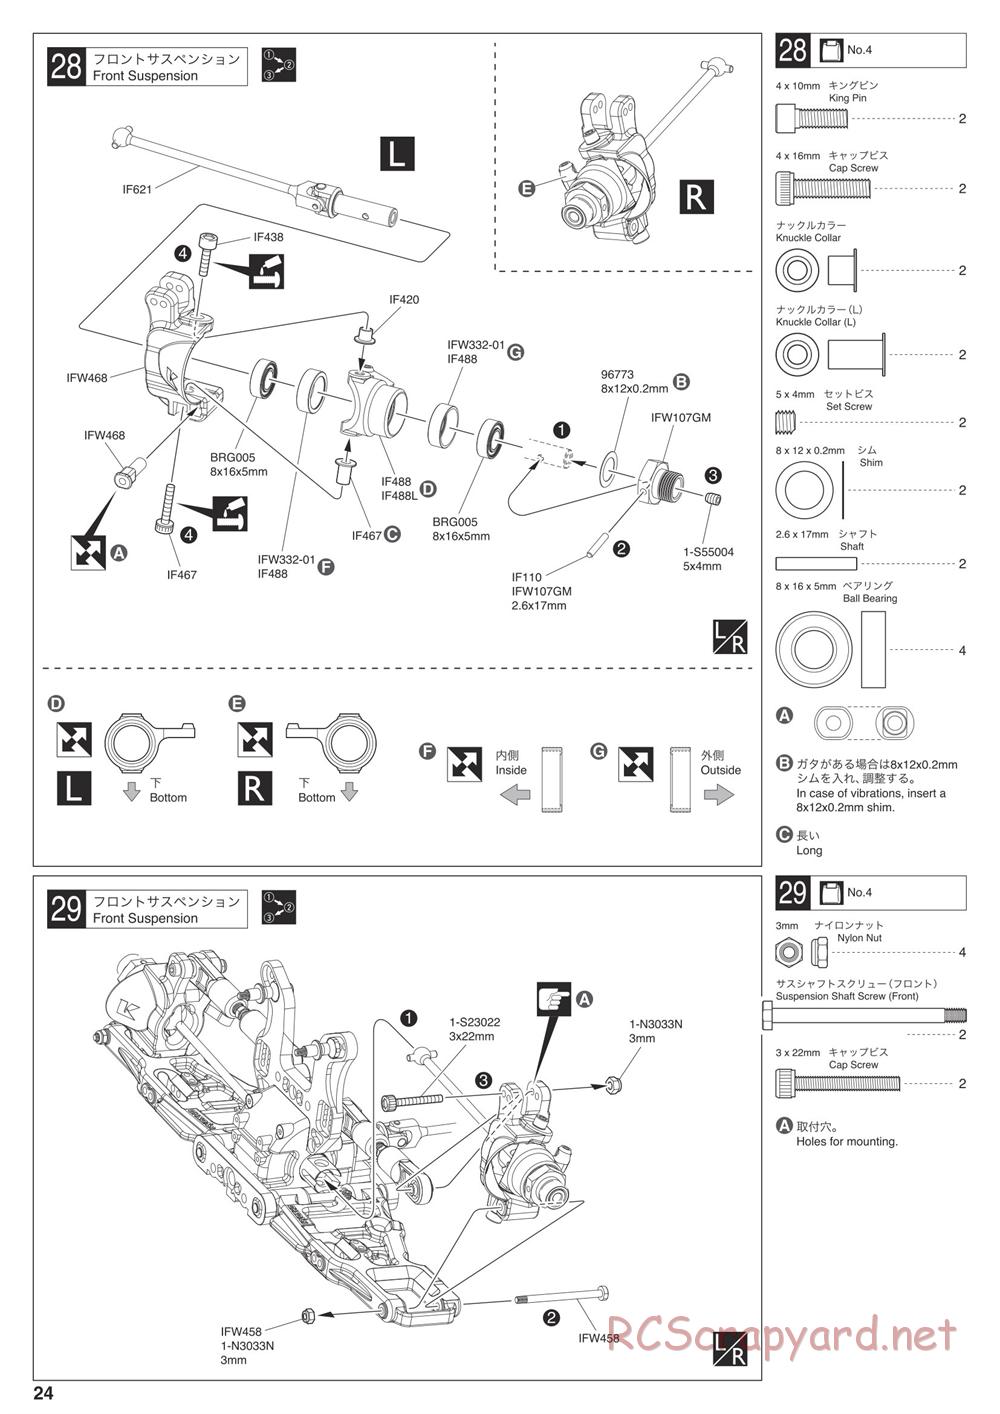 Kyosho - Inferno MP10 - Manual - Page 24